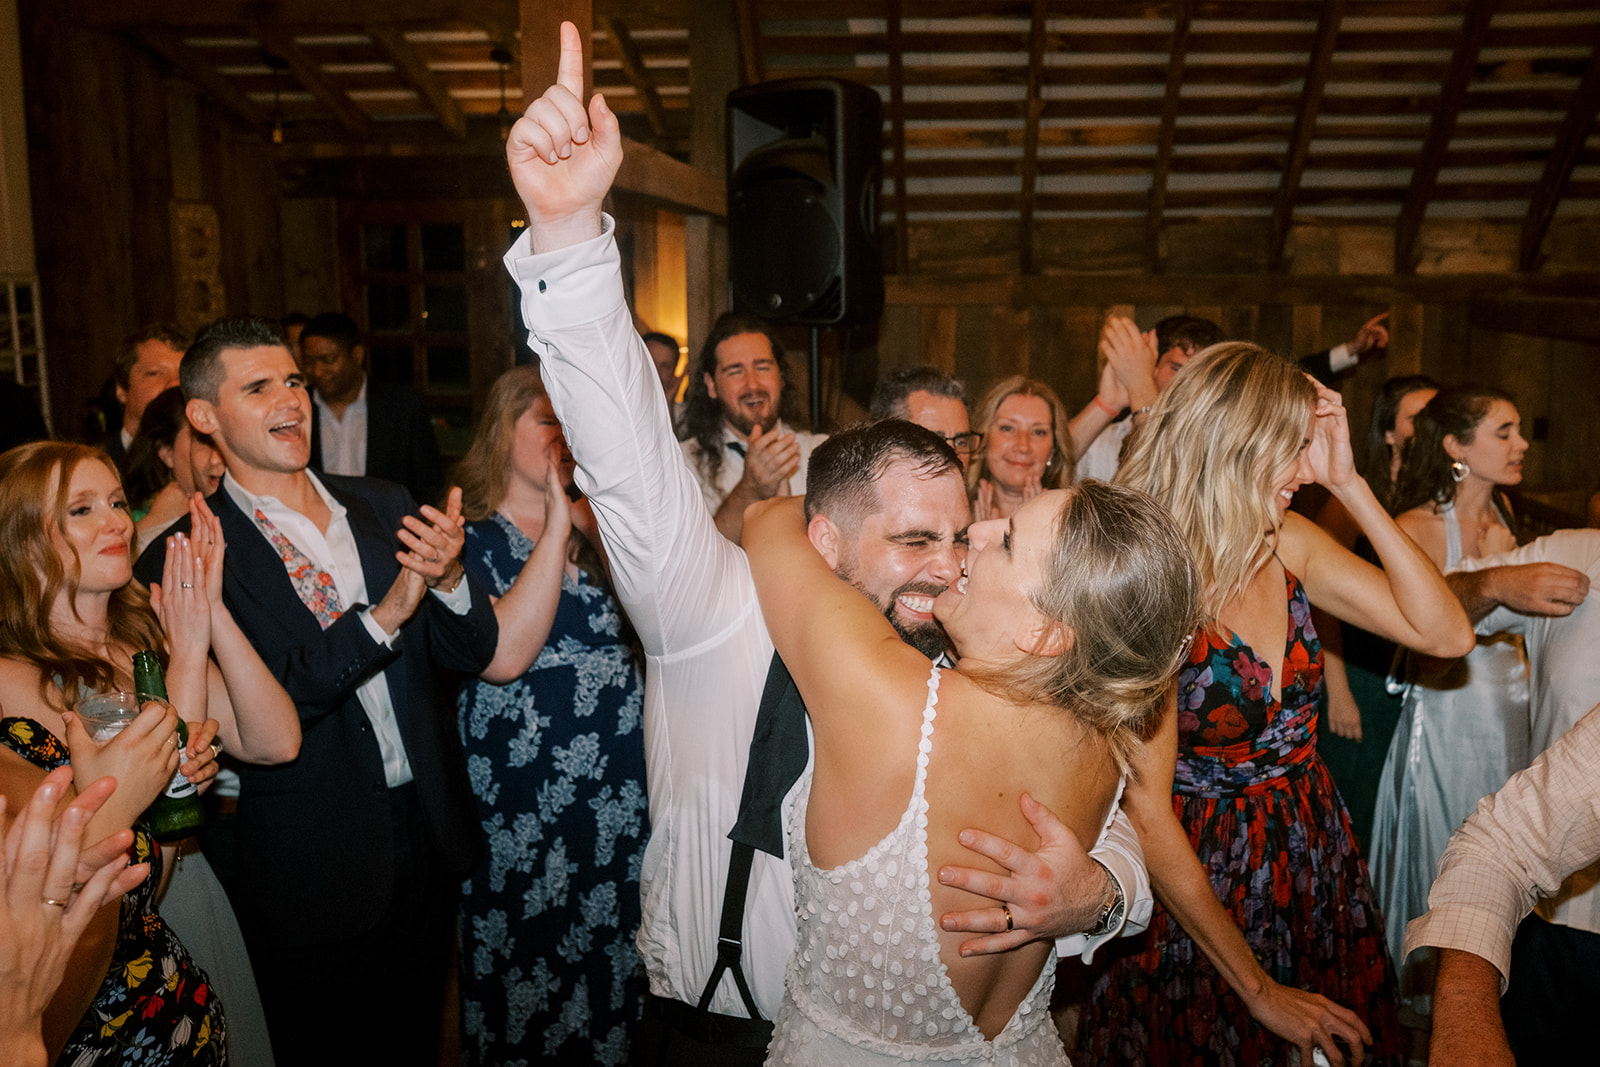 Bride and groom celebrate during final dance of the night at Virginia barn reception